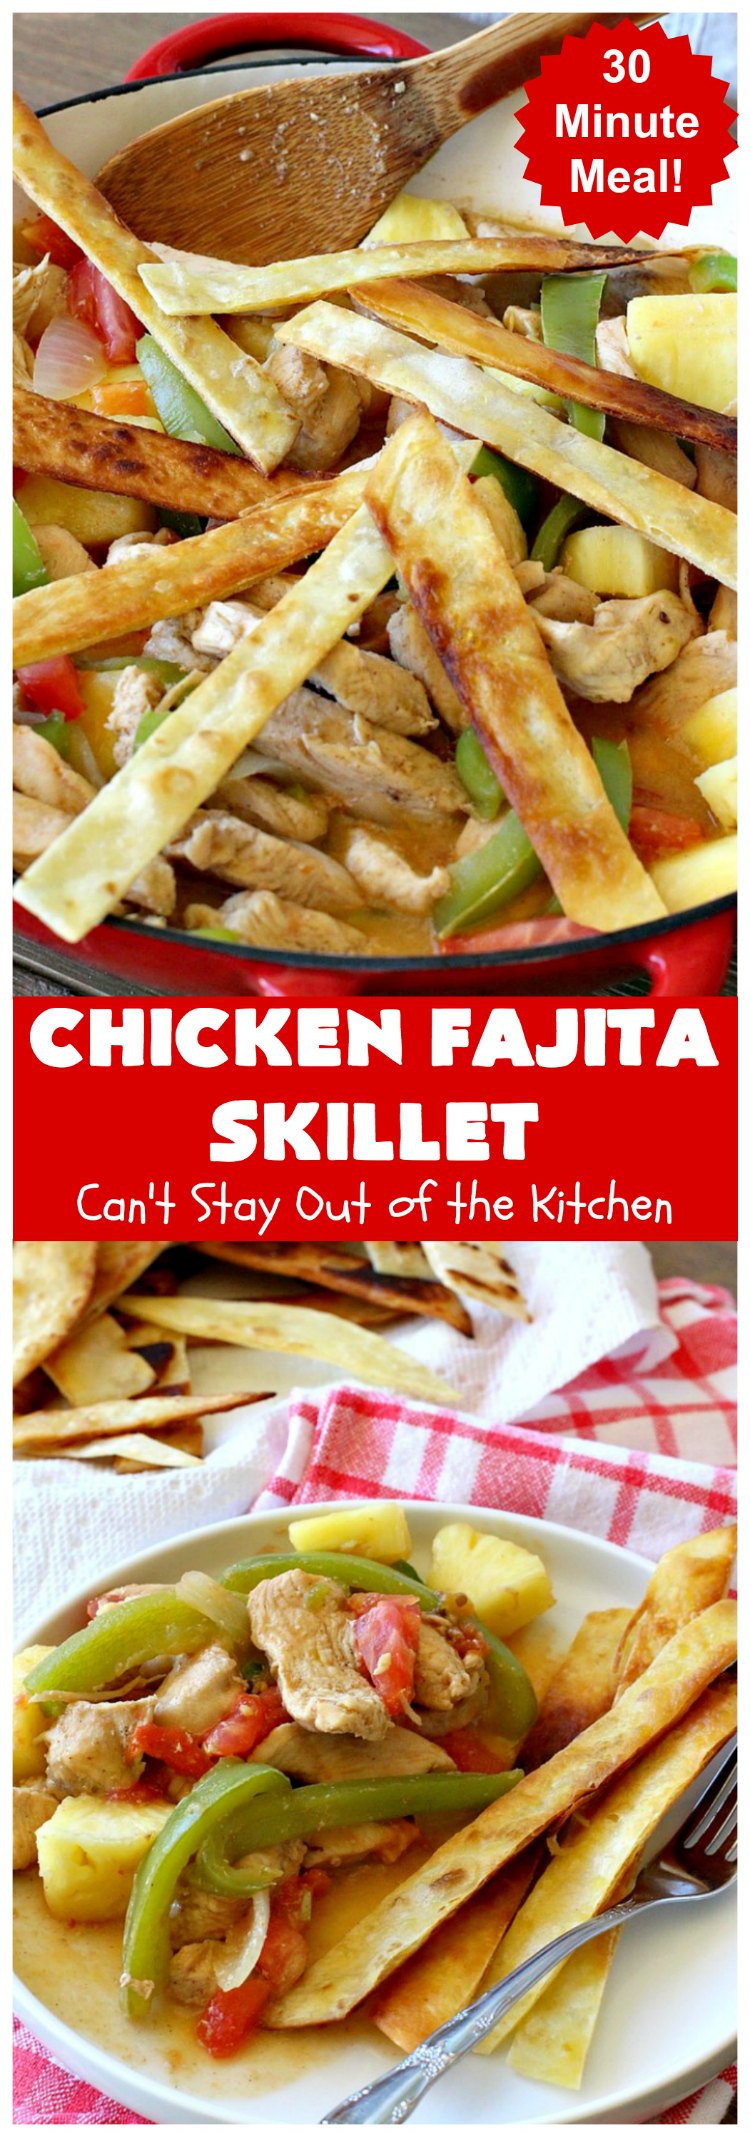 Chicken Fajita Skillet | Can't Stay Out of the Kitchen | #ChickenFajitaSkillet with Fried #tortilla strips is the best 30-minute one dish meal around! It's so easy to put together making it an excellent choice for busy weeknight dinners. #chicken #ChickenFajita #pineapple #OneDishDinner #30MinuteMeal #EasySkilletDinner #ChickenFajitaSkillet